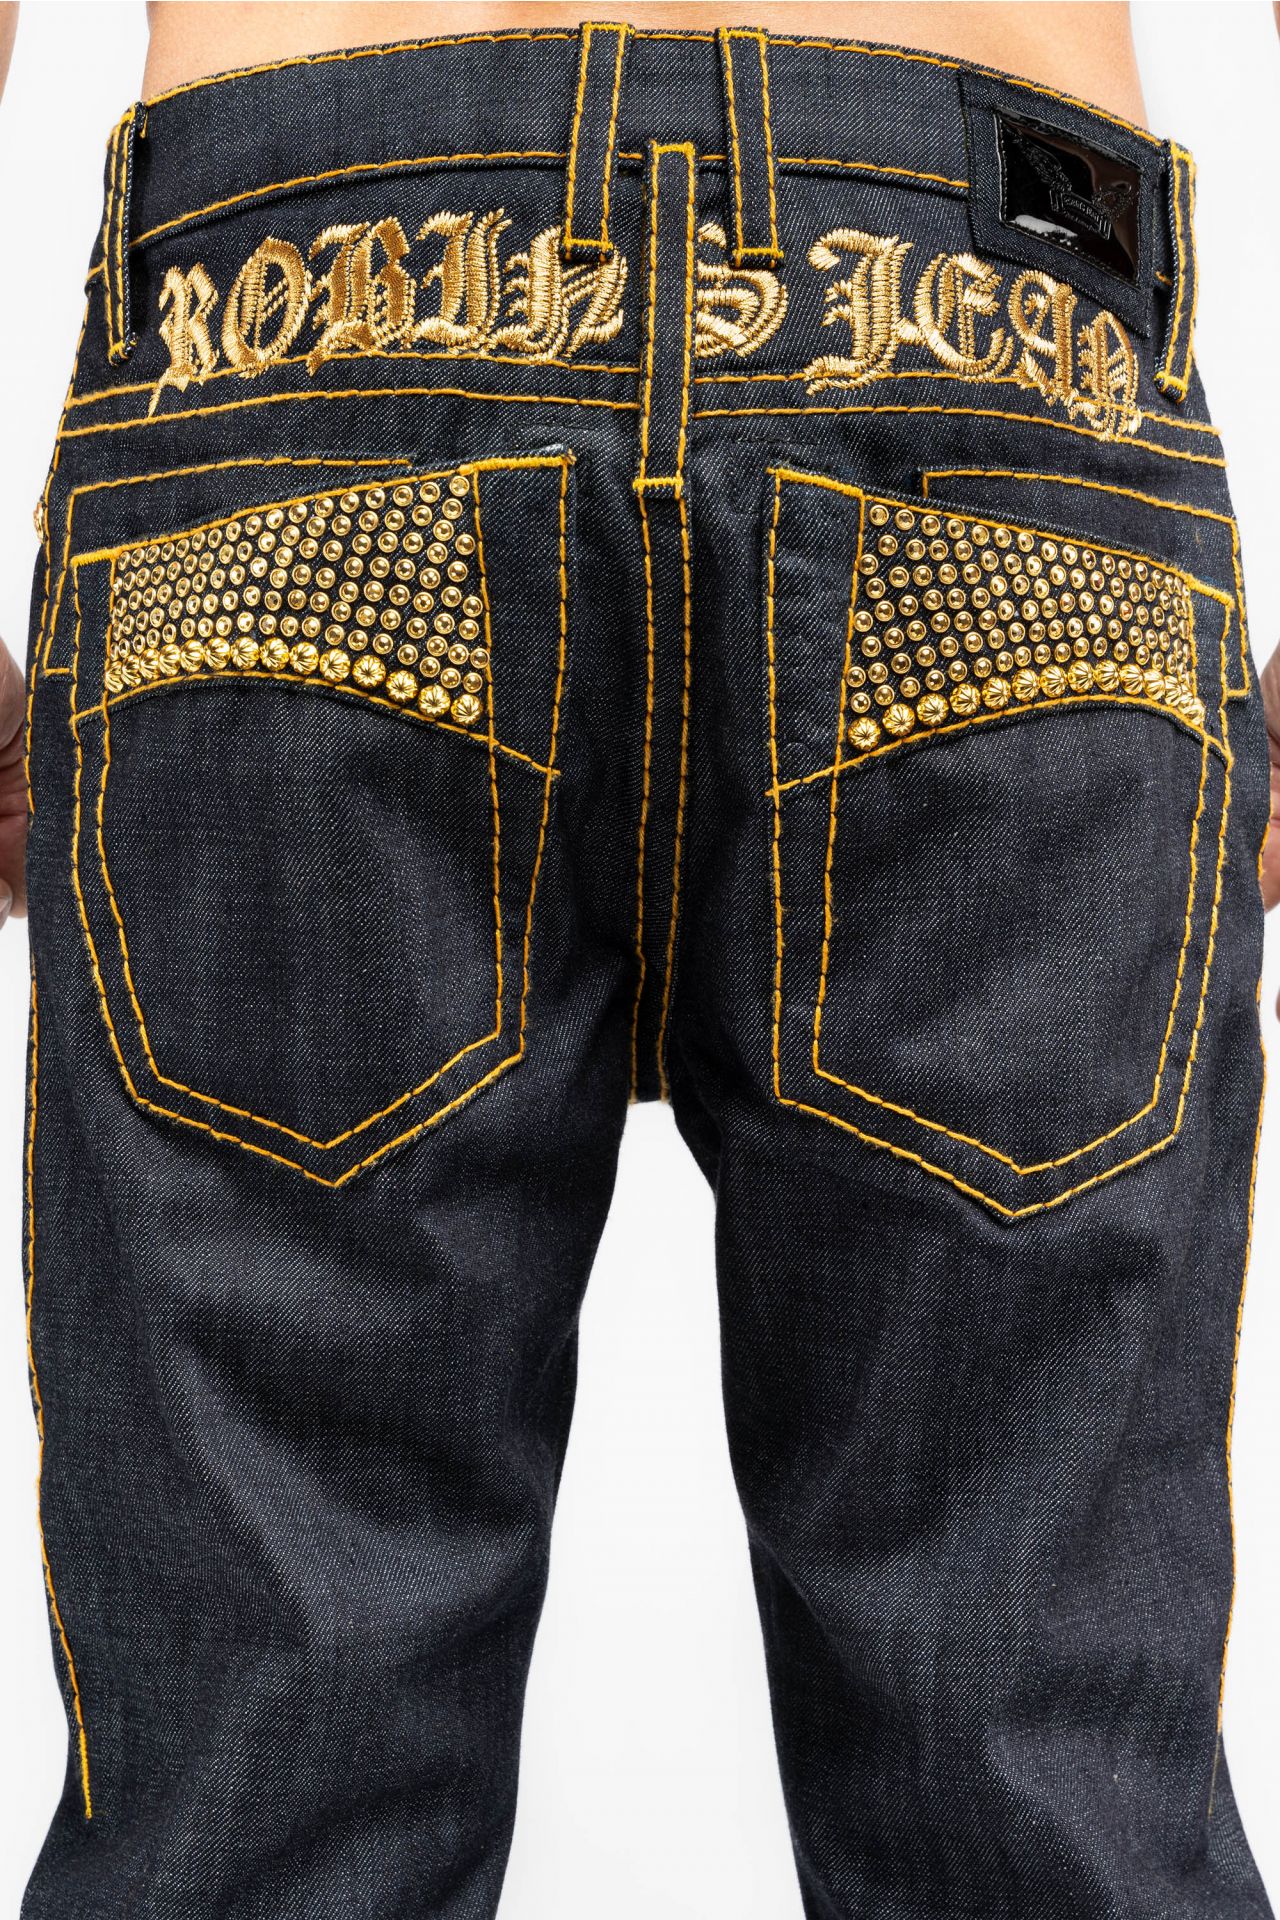 MENS RAW DENIM SLIM FIT CLASSIC JEANS WITH ORANGE HEAVY STITCHING STUDS AND CRYSTALS